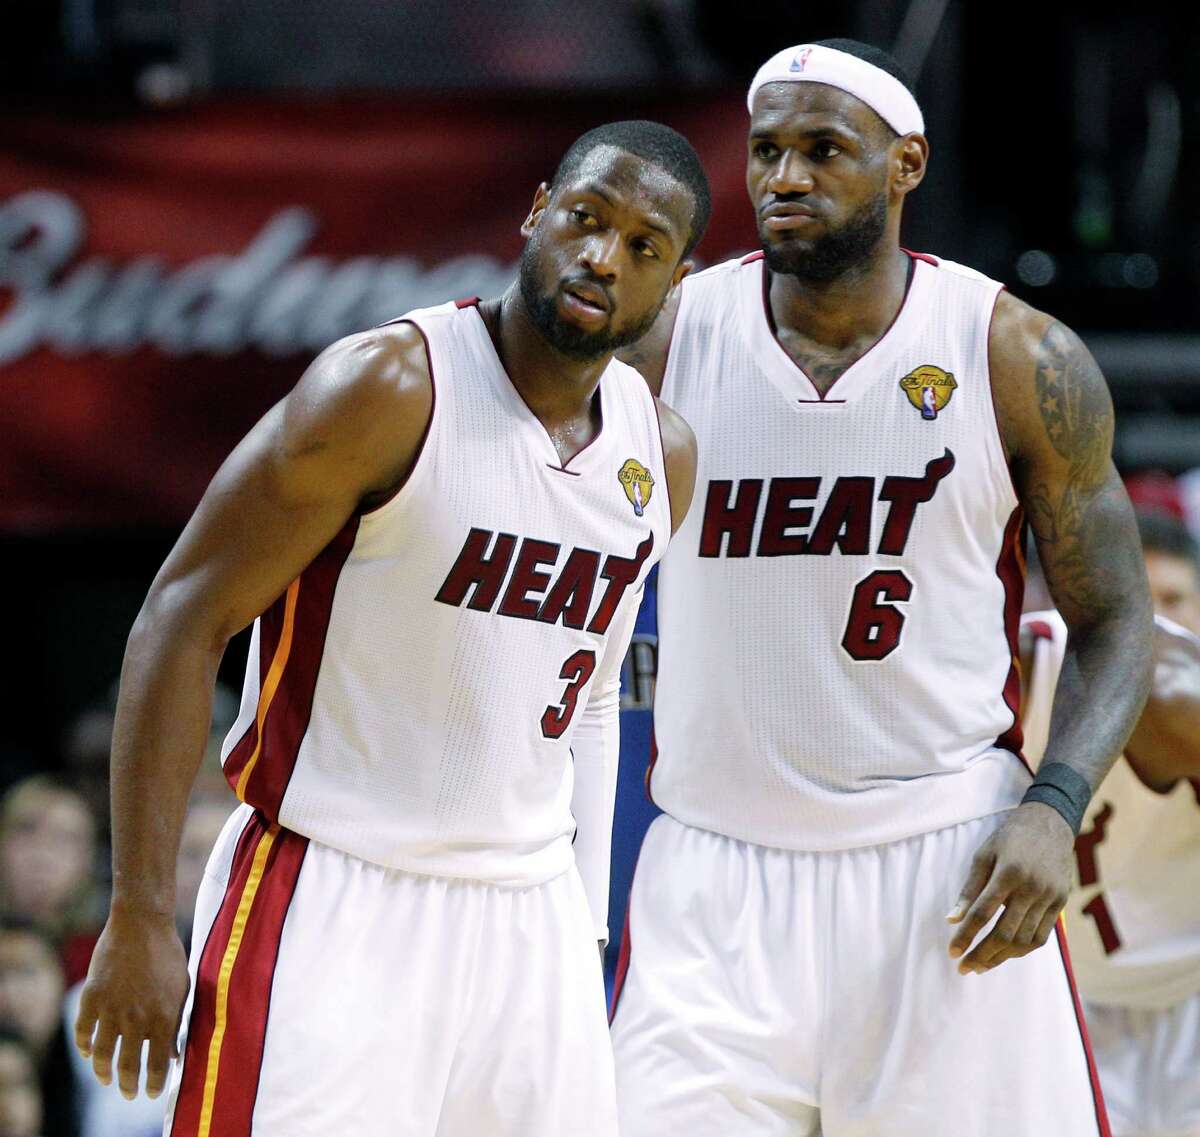 Miami Heat's Dwyane Wade (3) and LeBron James (6) reacts during the first half of Game 6 of the NBA Finals basketball game against the Dallas Mavericks Sunday, June 12, 2011, in Miami. (AP Photo/Lynne Sladky)